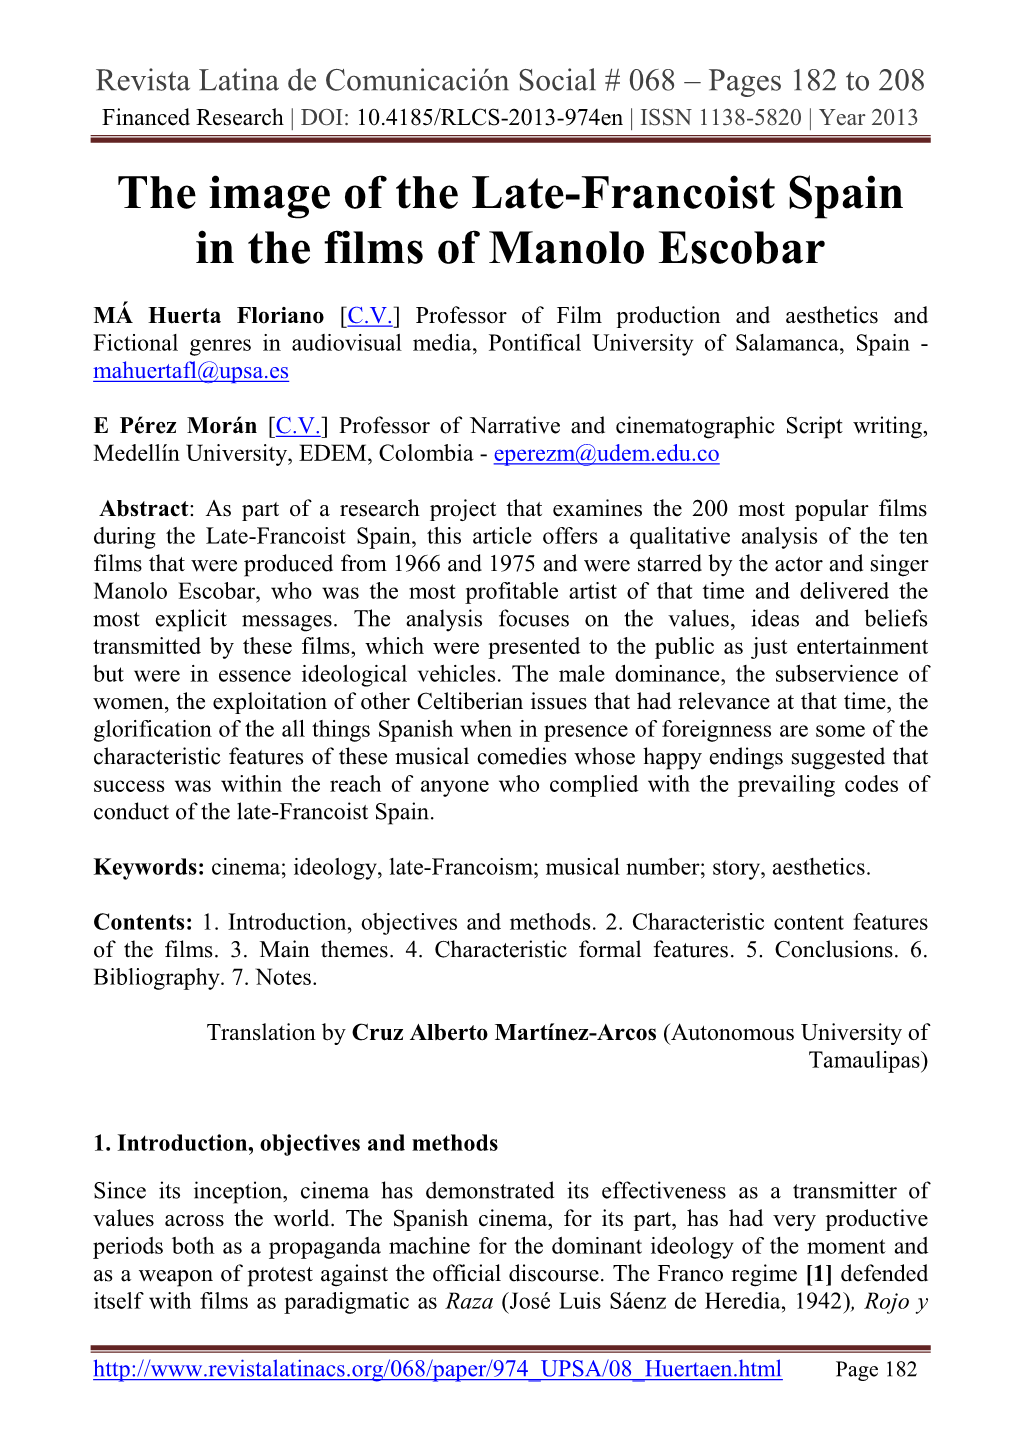 The Image of the Late-Francoist Spain in the Films of Manolo Escobar